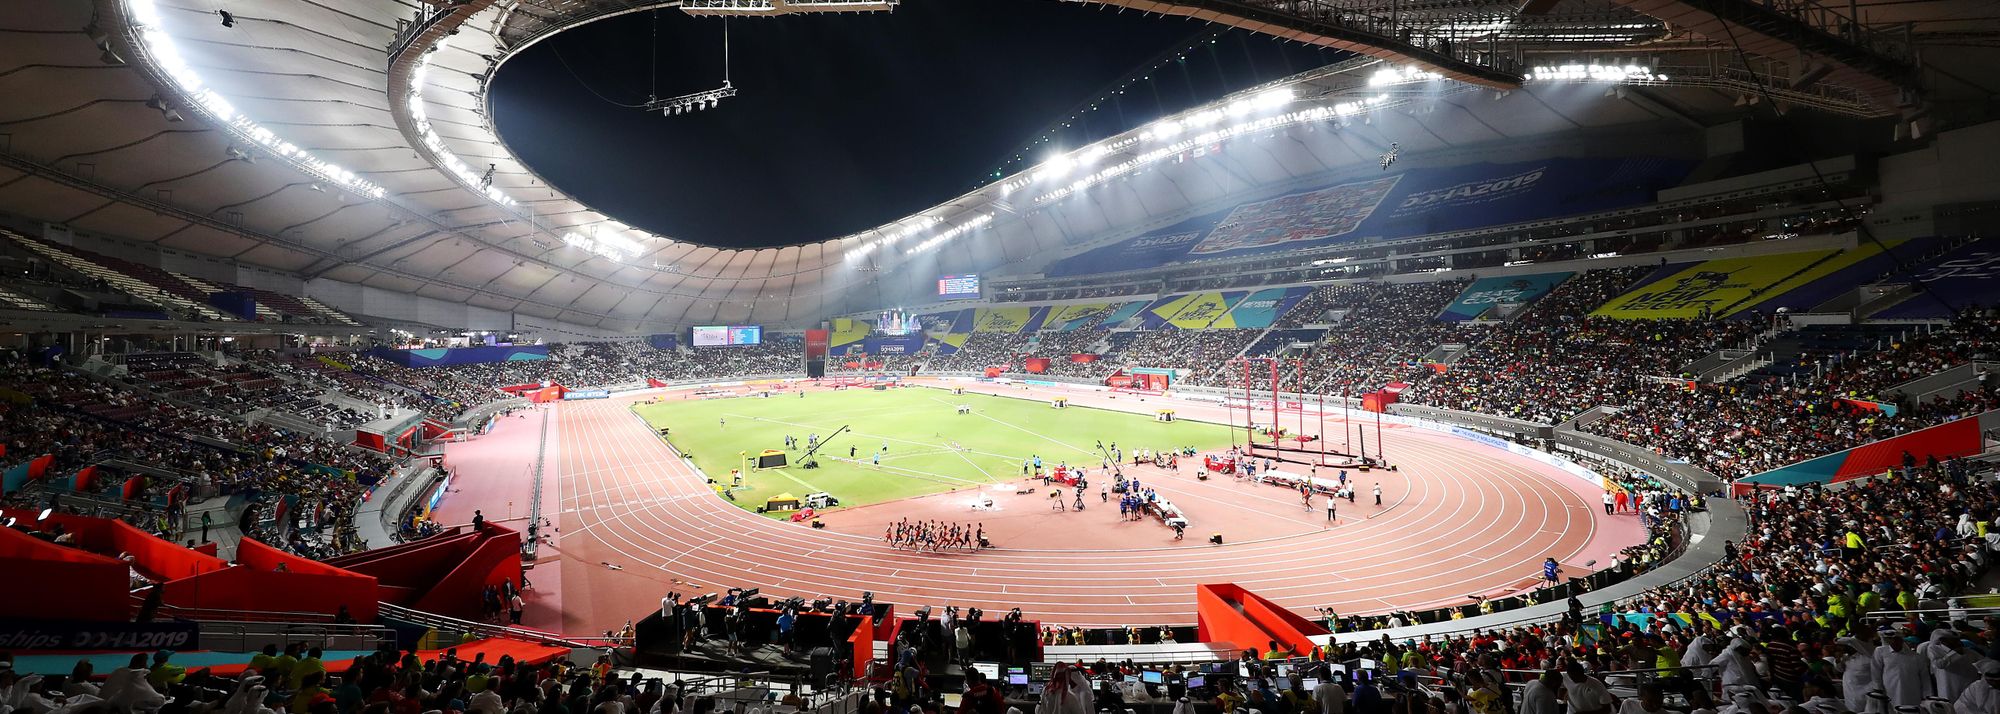 World Athletics President Sebastian Coe has described the World Athletics Championships Doha 2019 as the best in history in terms of the quality and depth of performances produced by the athletes of more than 200 nations.